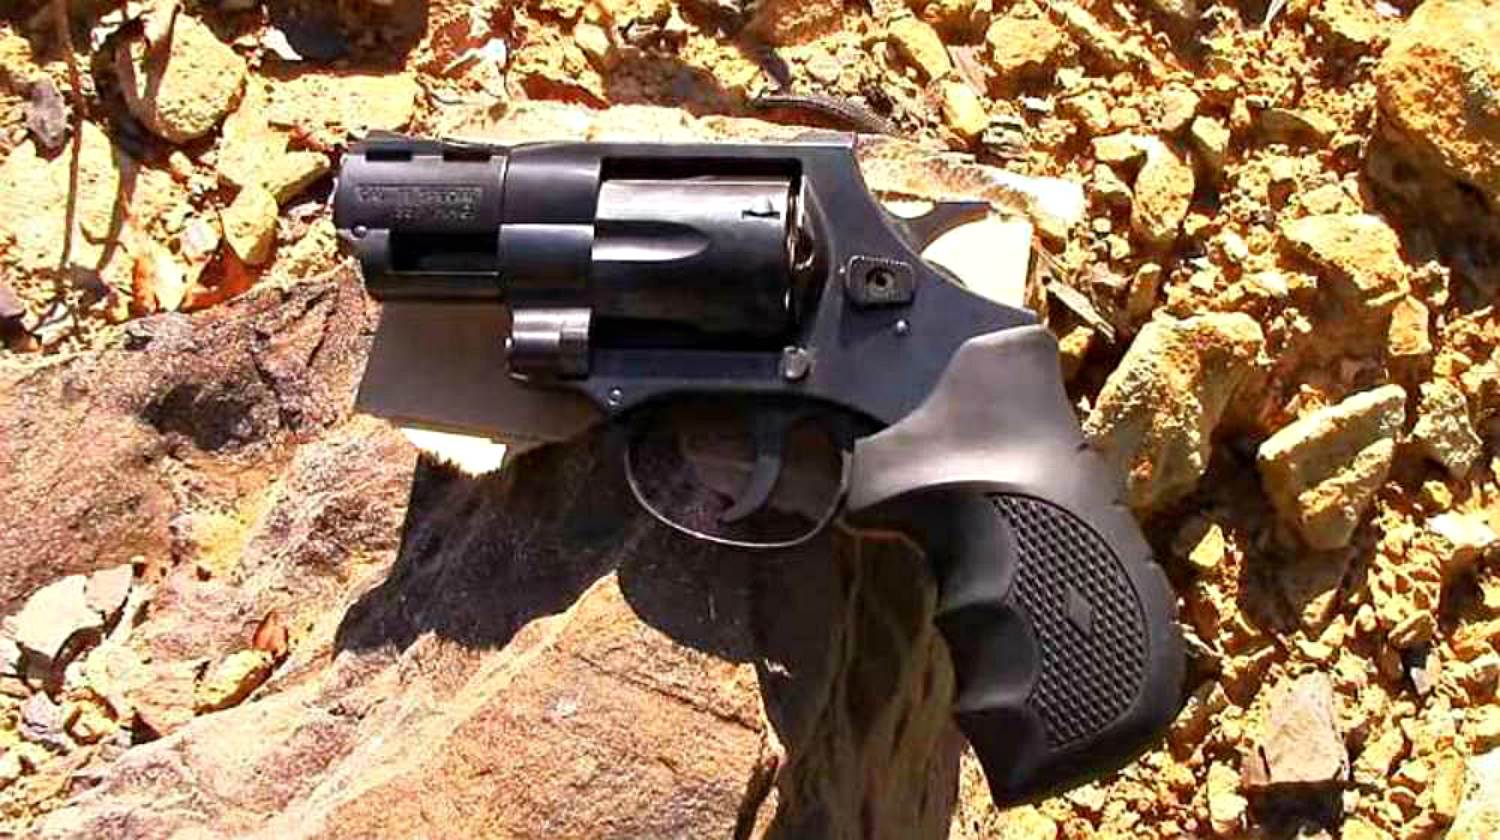 Feature Revolver in the ground EAA Windicator .357 Magnum Gun Carrier Revie...